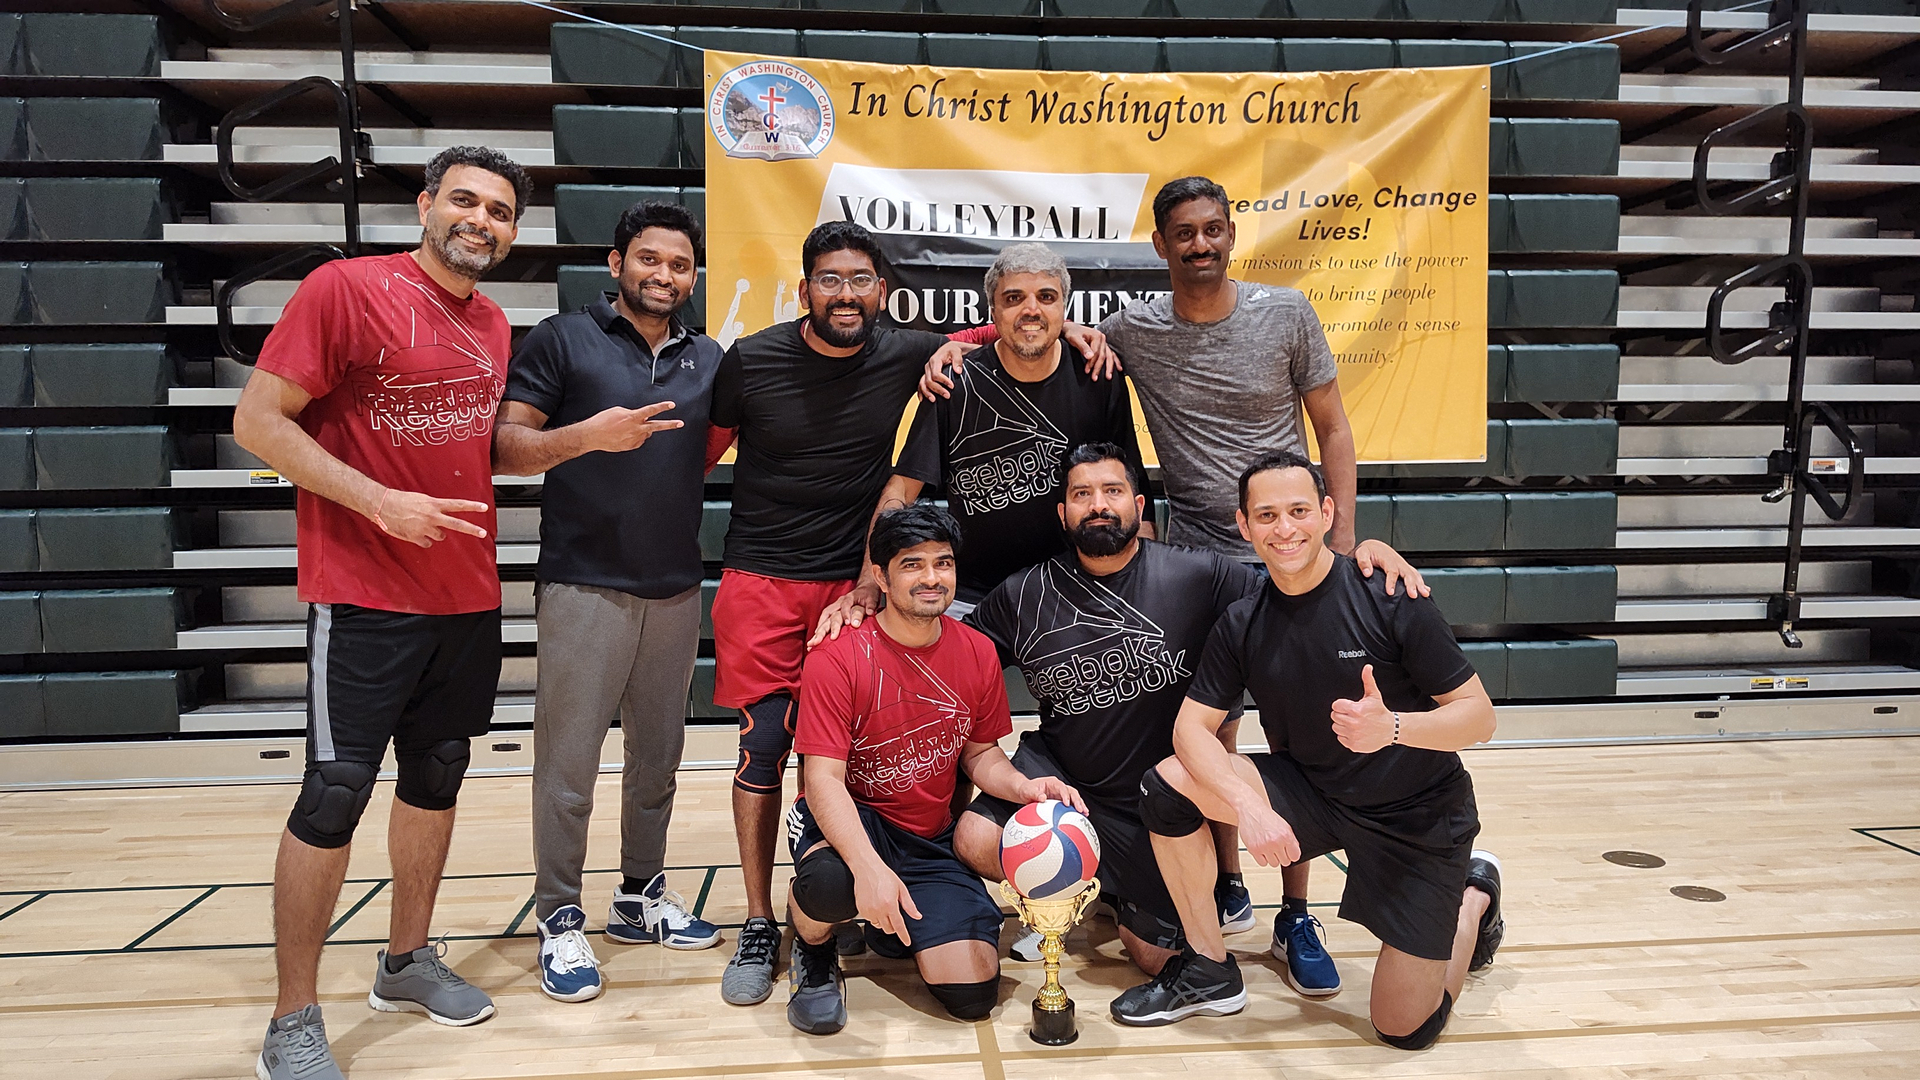 PHOTOS: Volleyball Tournament by ICWC